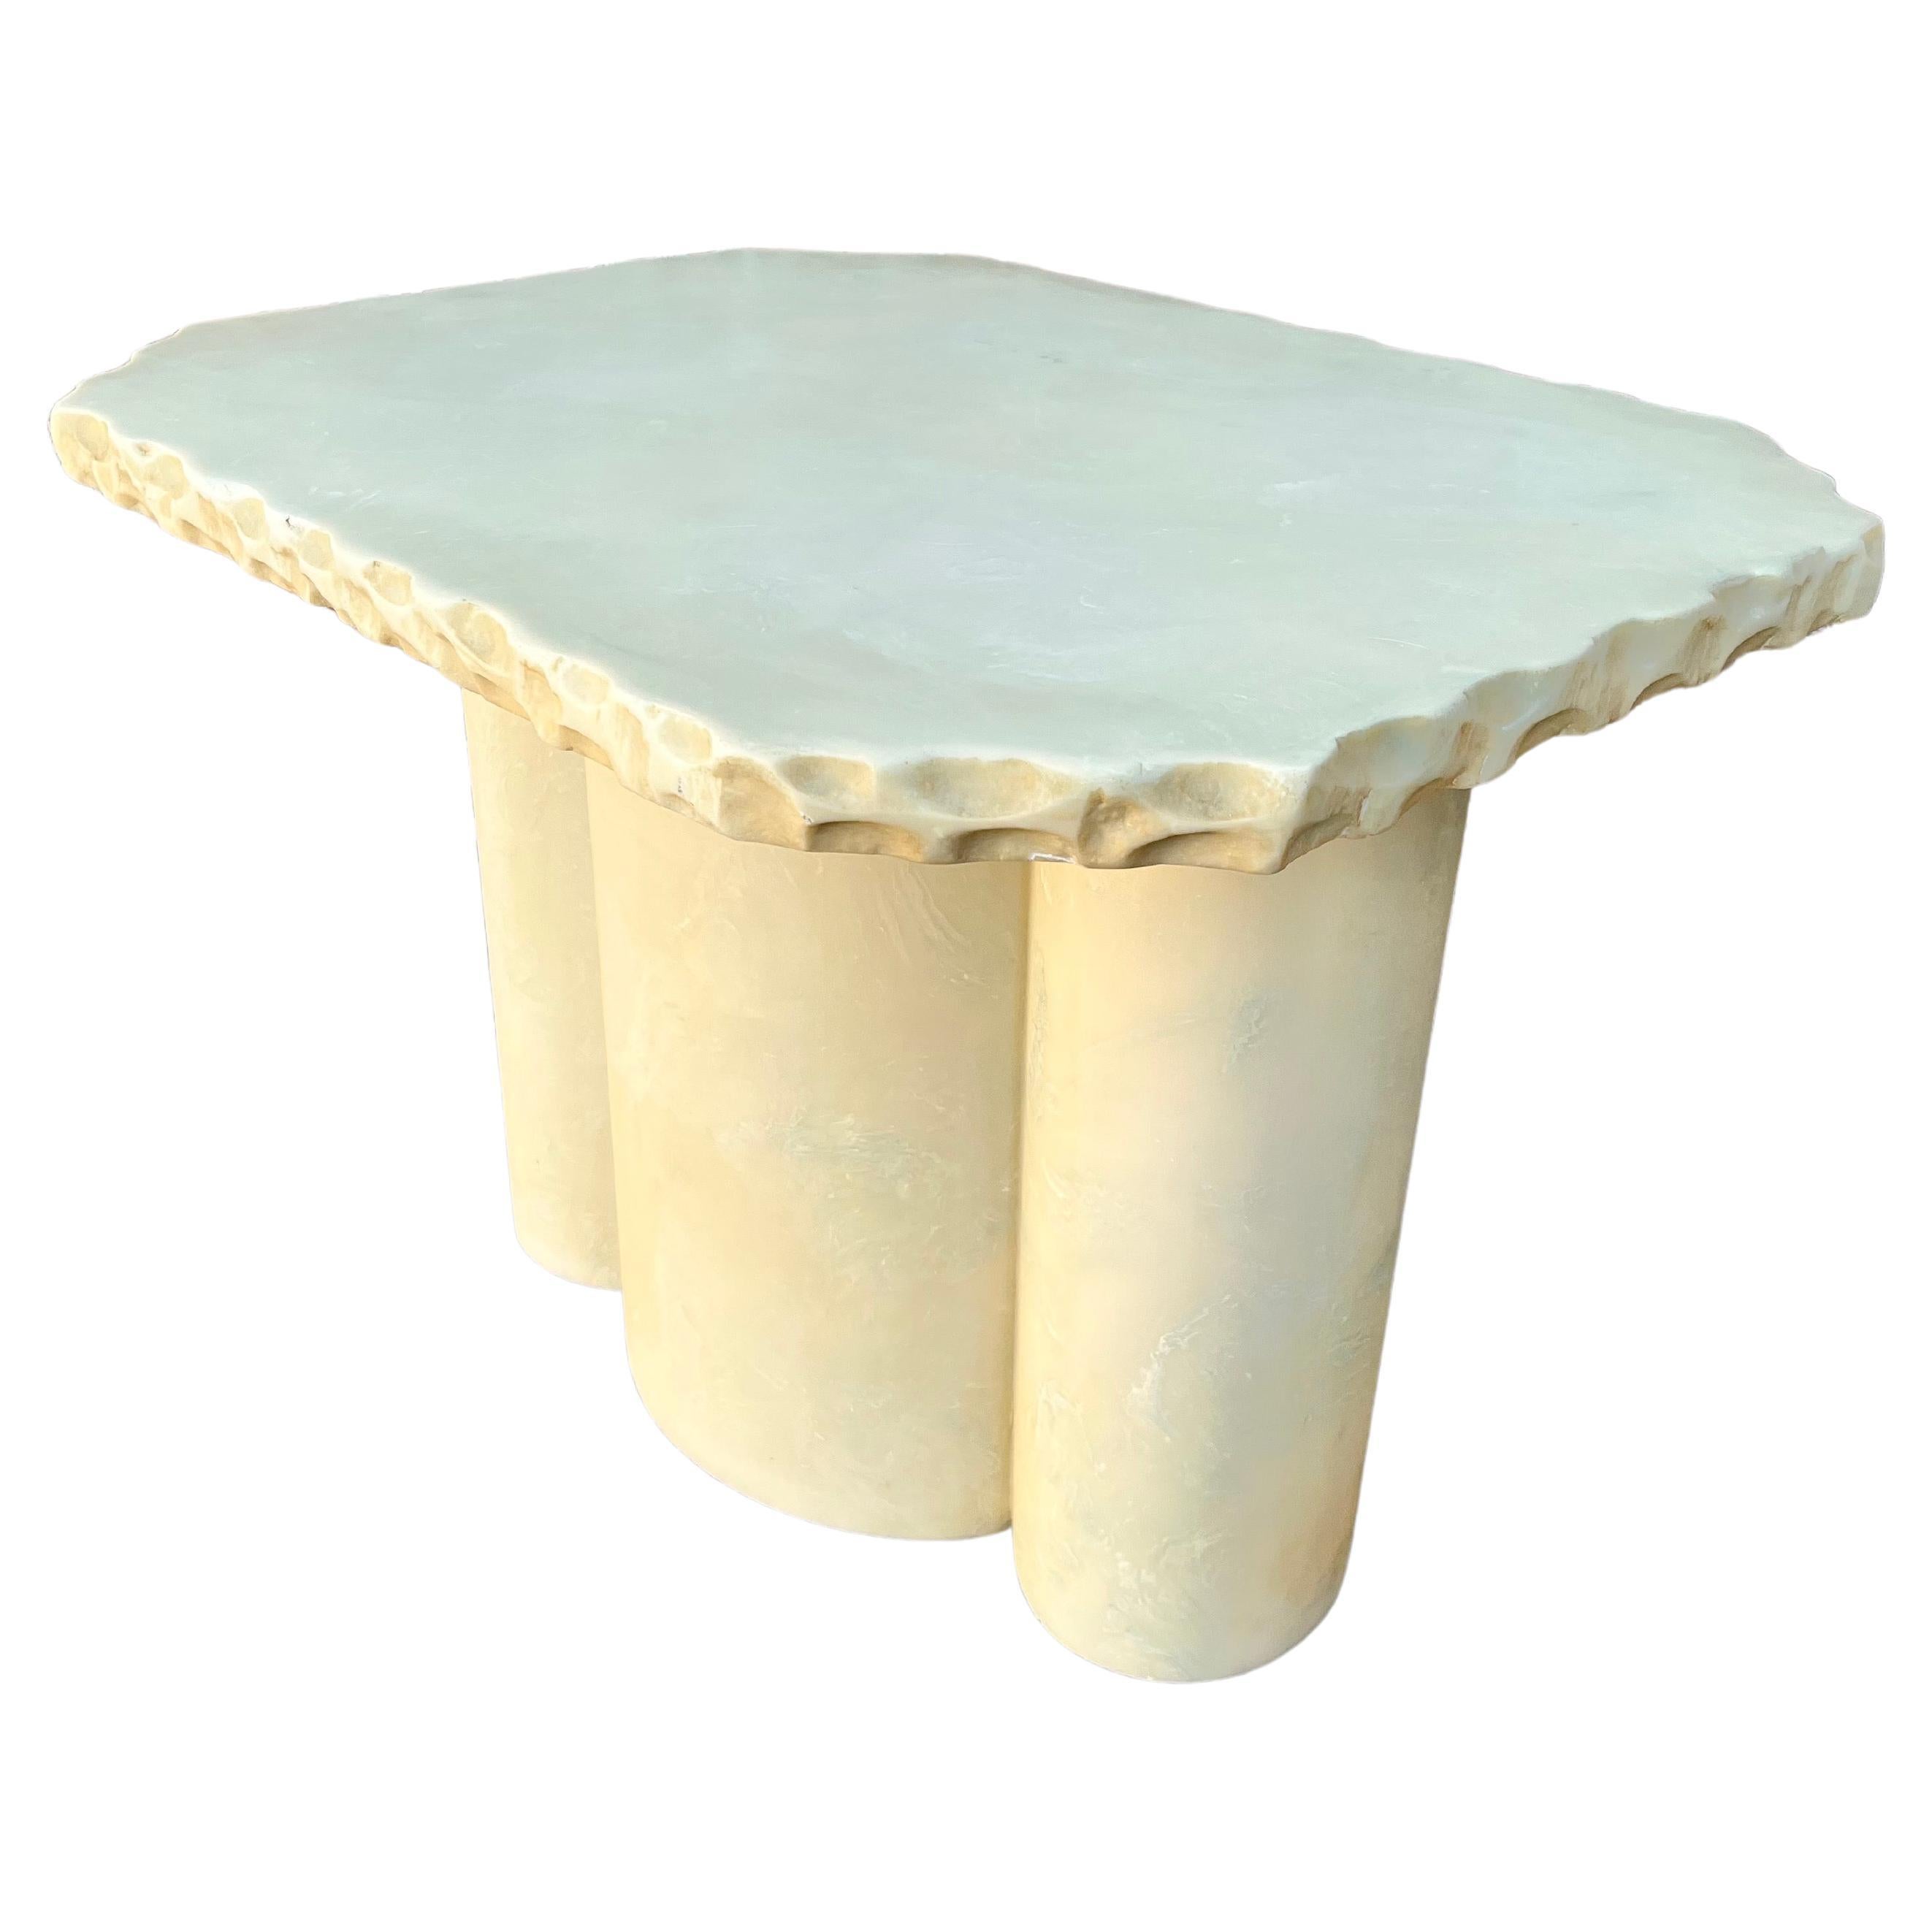 1980s Postmodern Faux Marble Resin Handcrafted Side Table